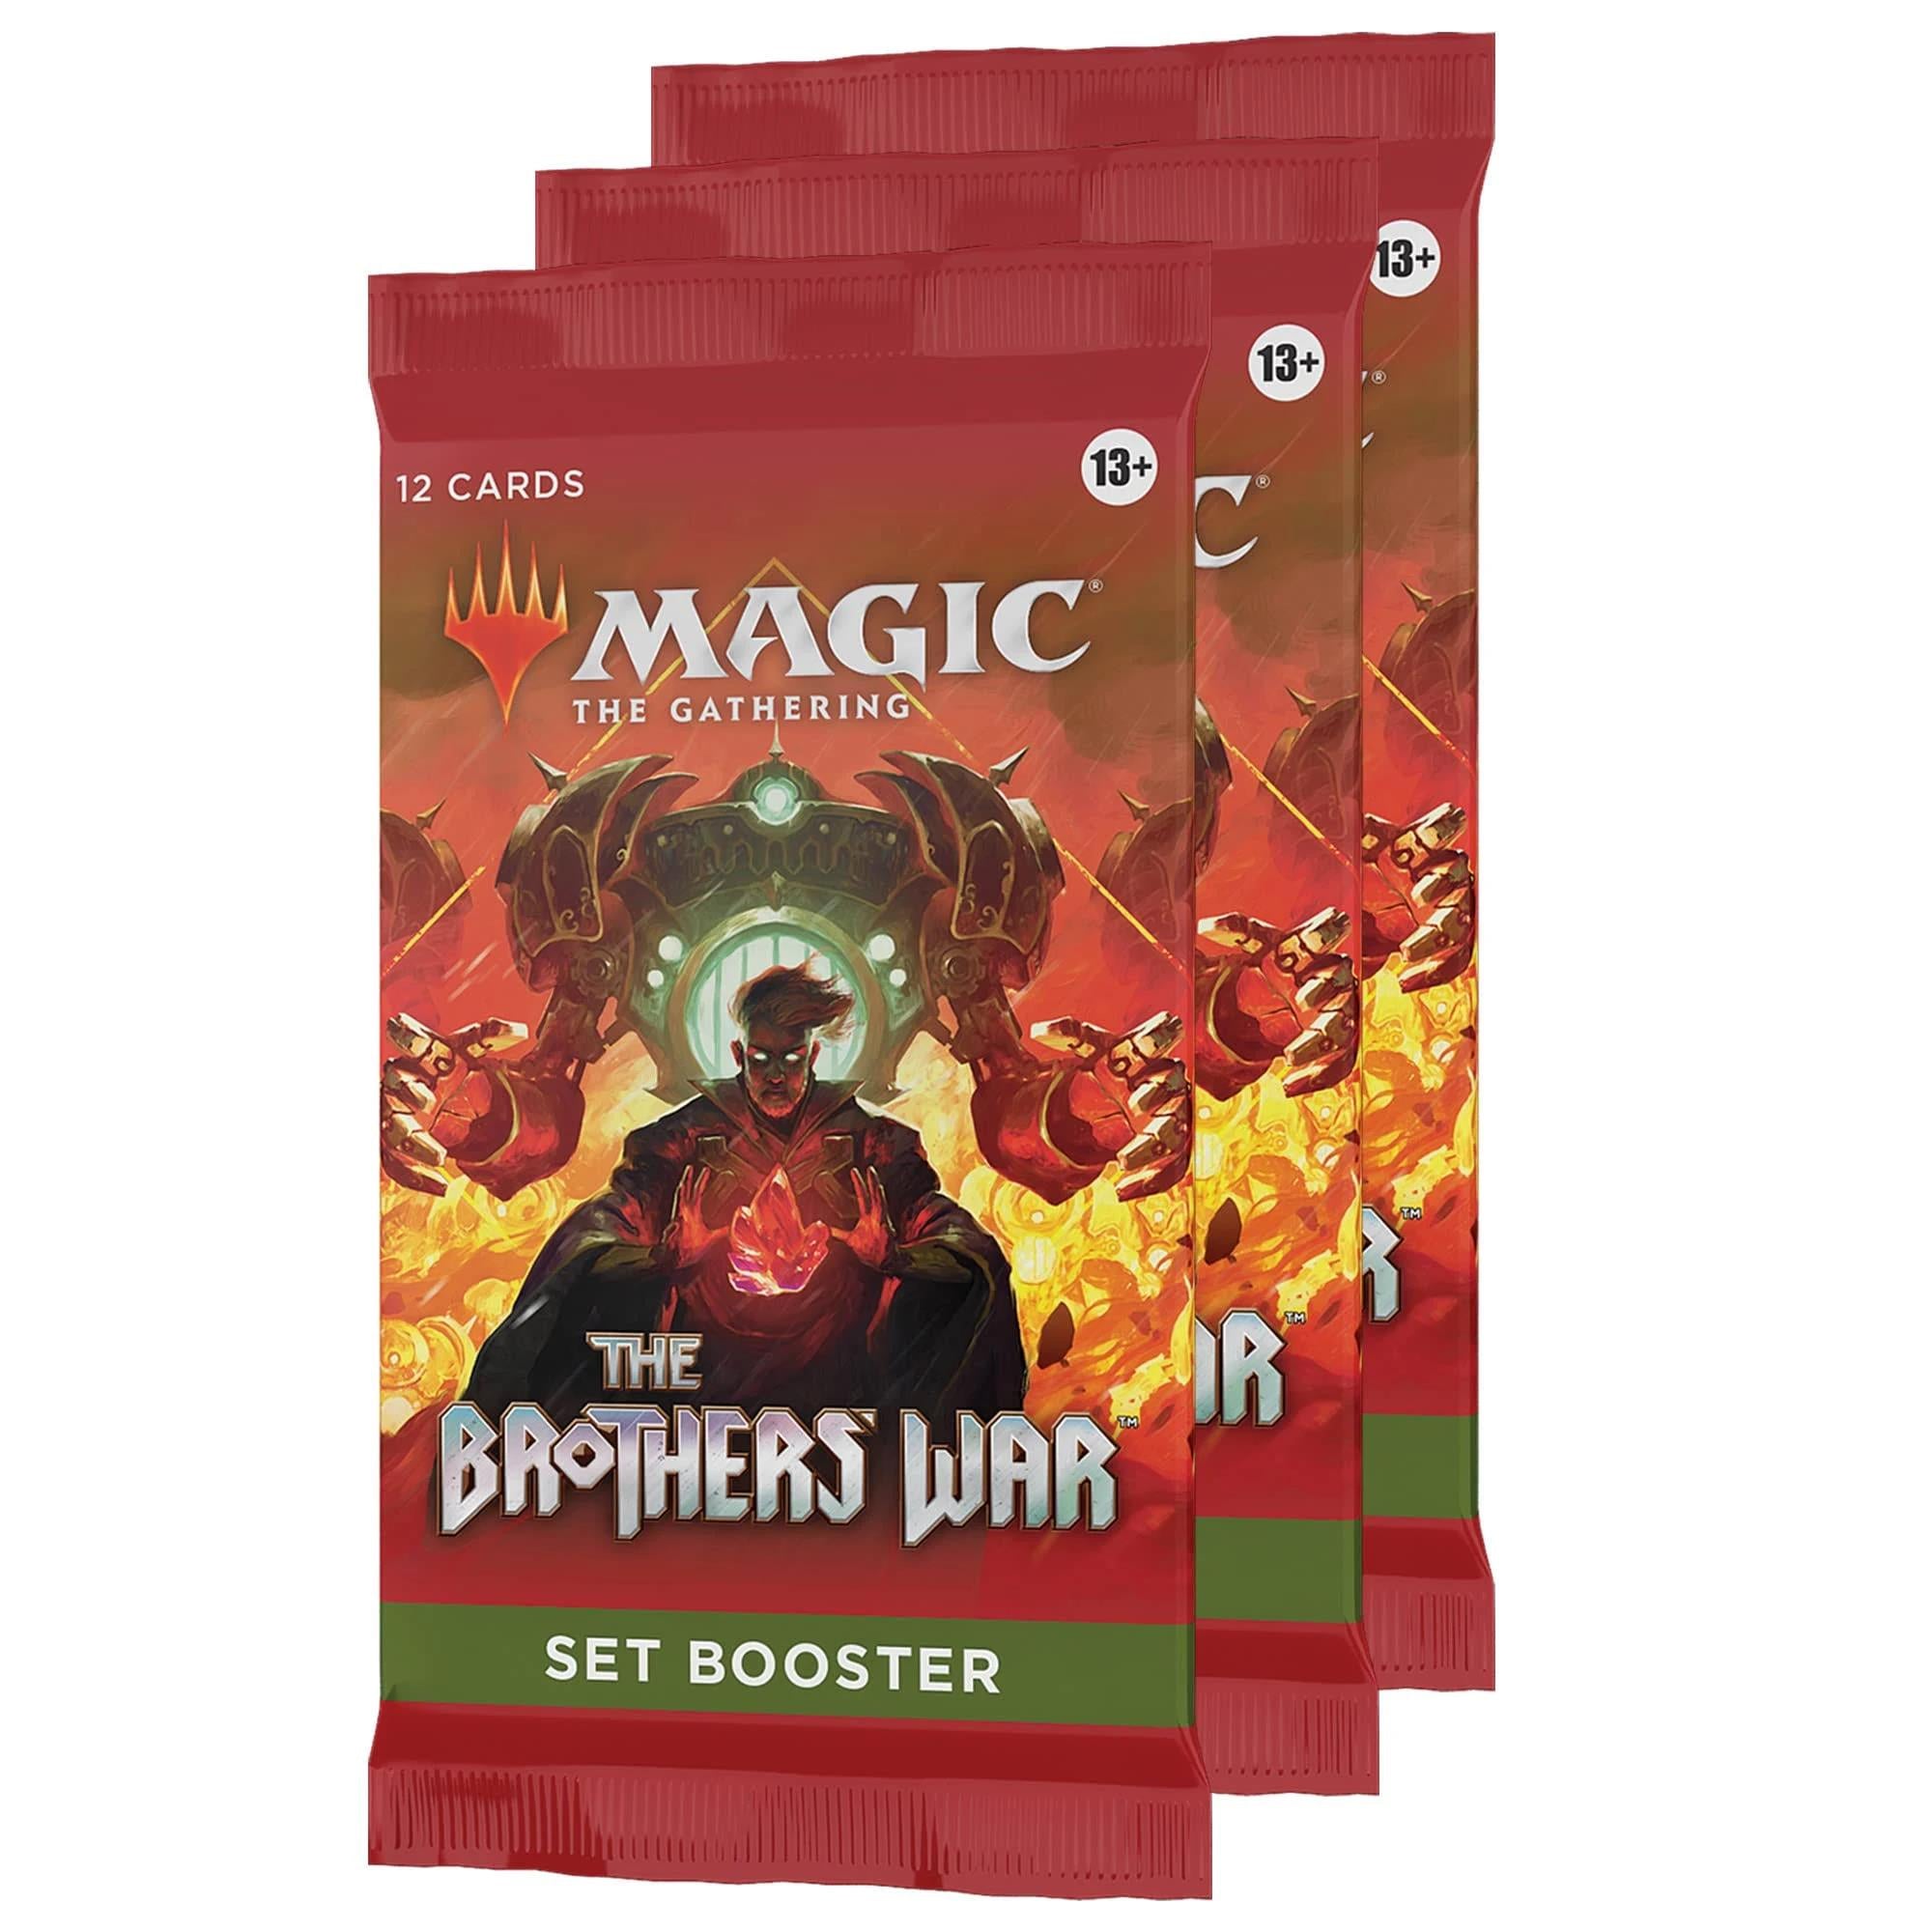 magic the gathering trading card game - the brothers war - set booster 3-pack